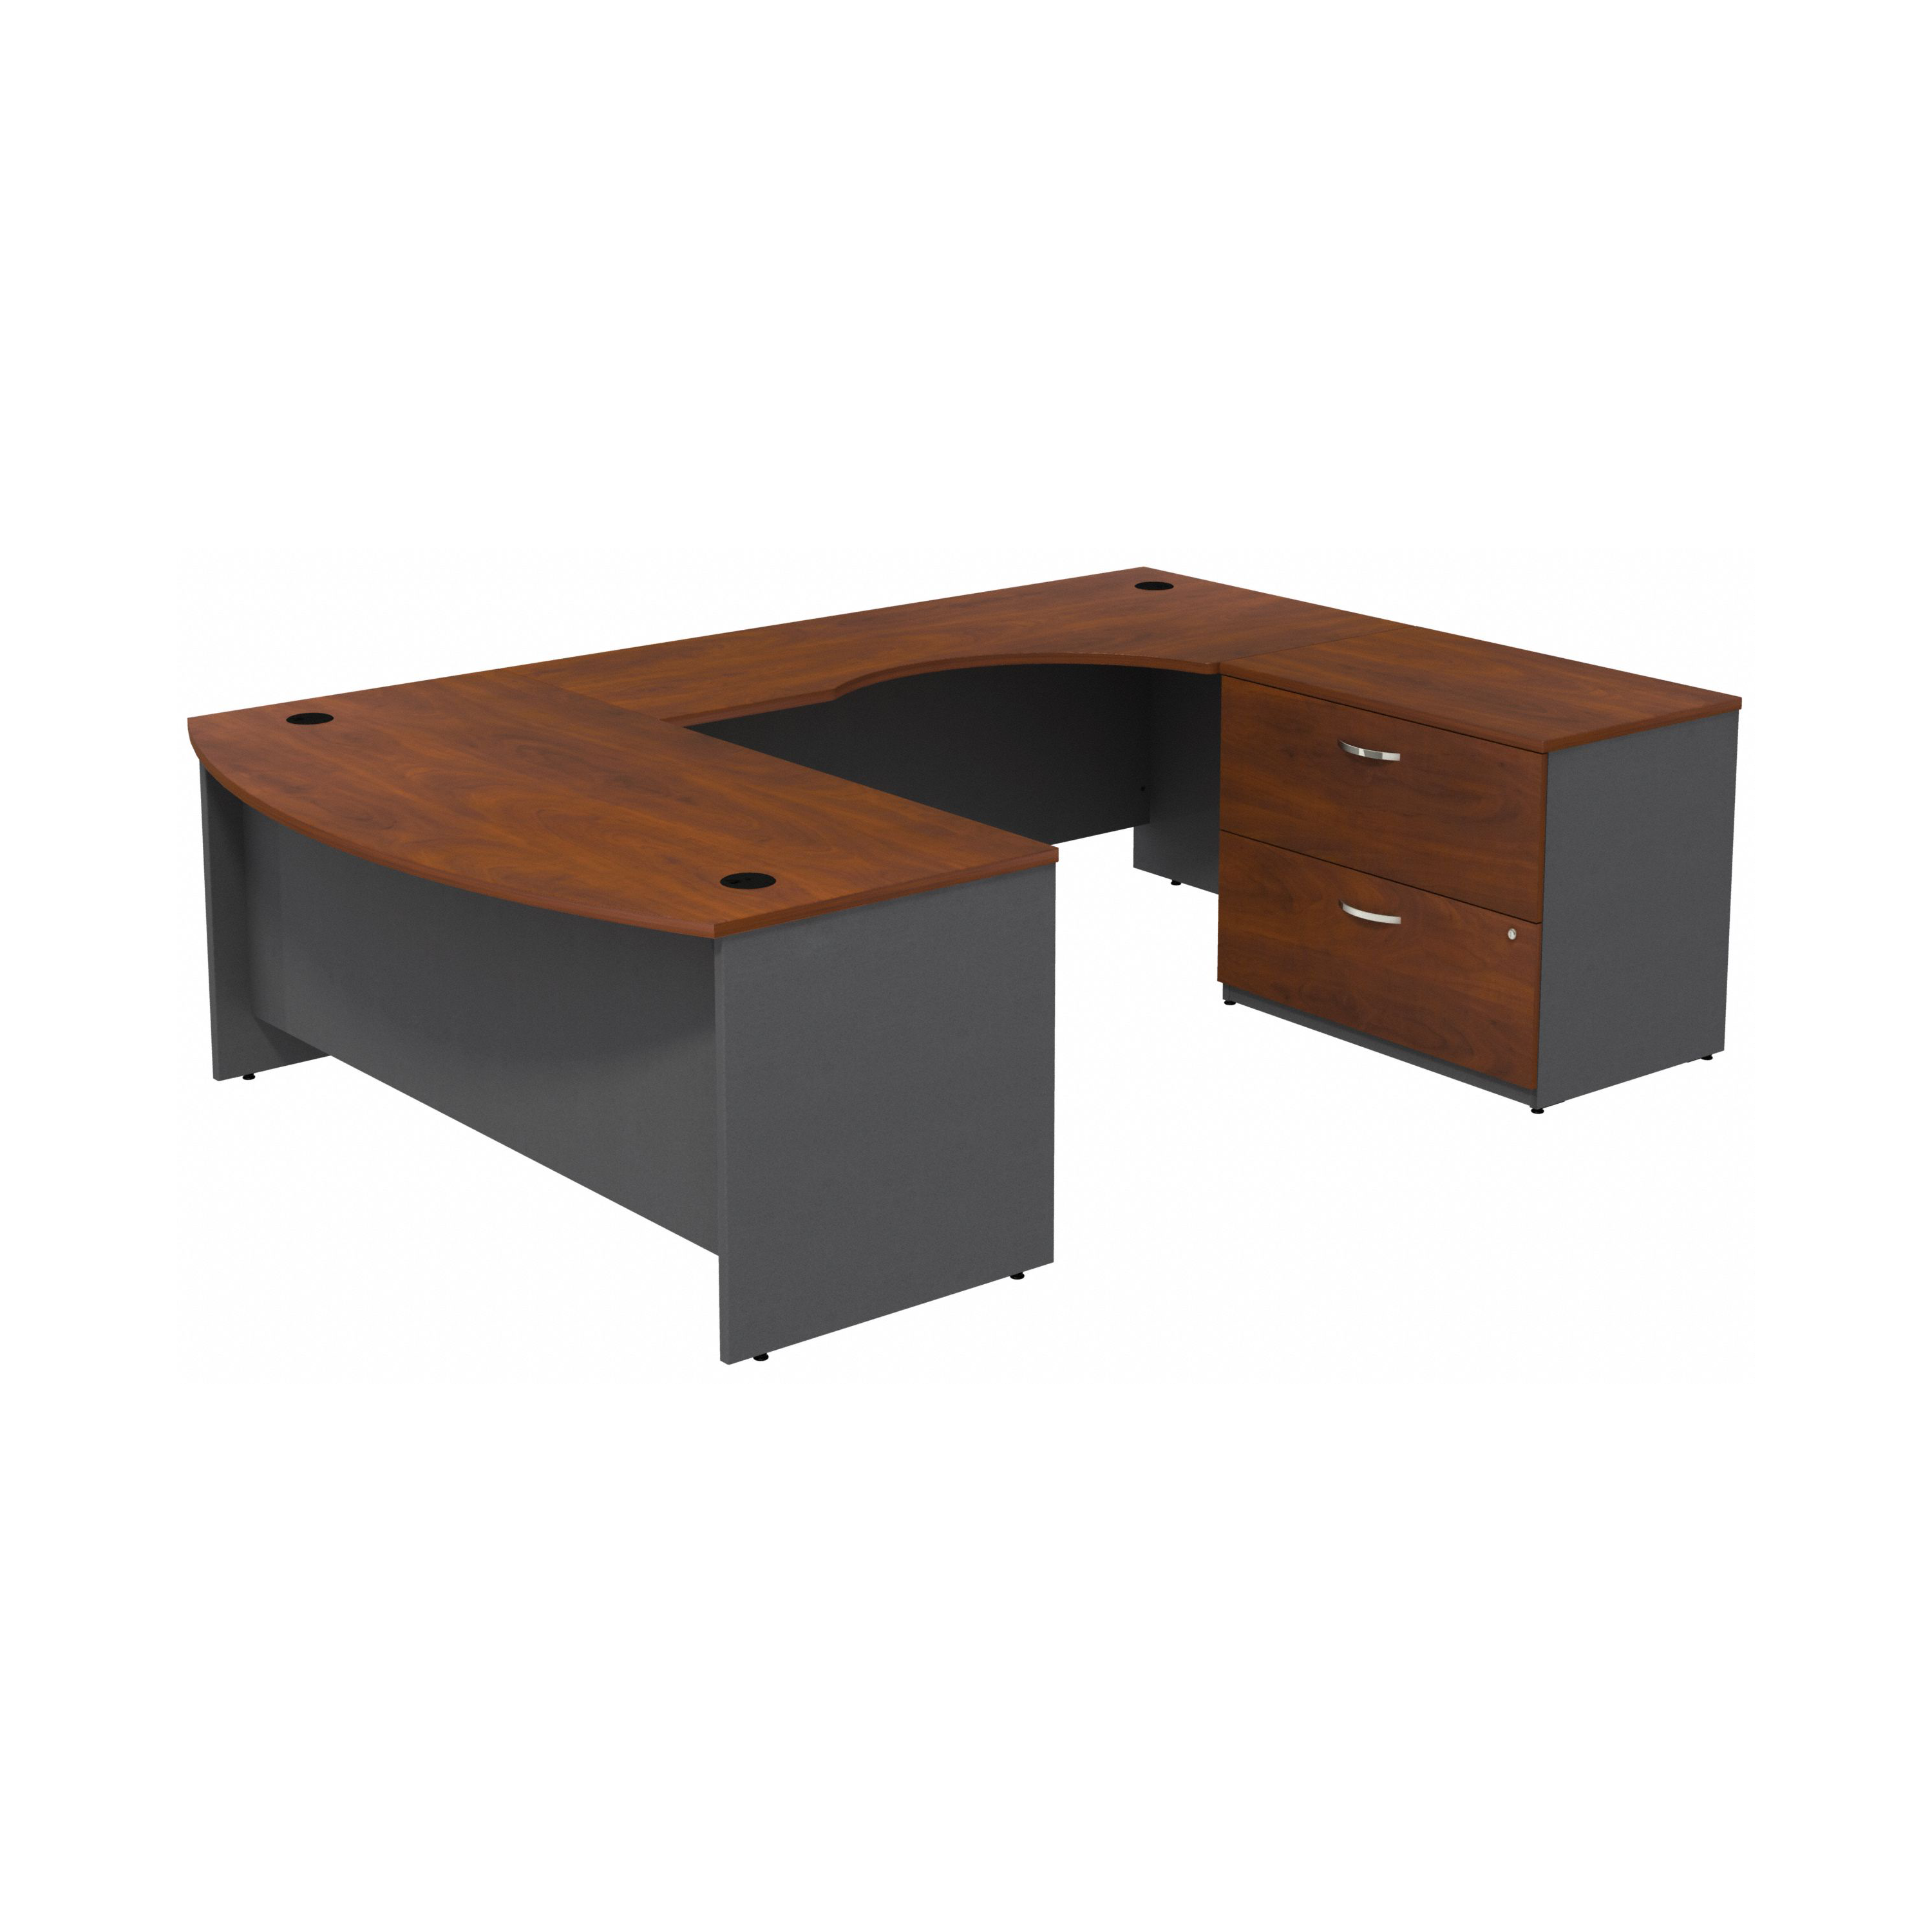 Shop Bush Business Furniture Series C Bow Front Right Handed U Shaped Desk with 2 Drawer Lateral File Cabinet 02 SRC019HCRSU #color_hansen cherry/graphite gray